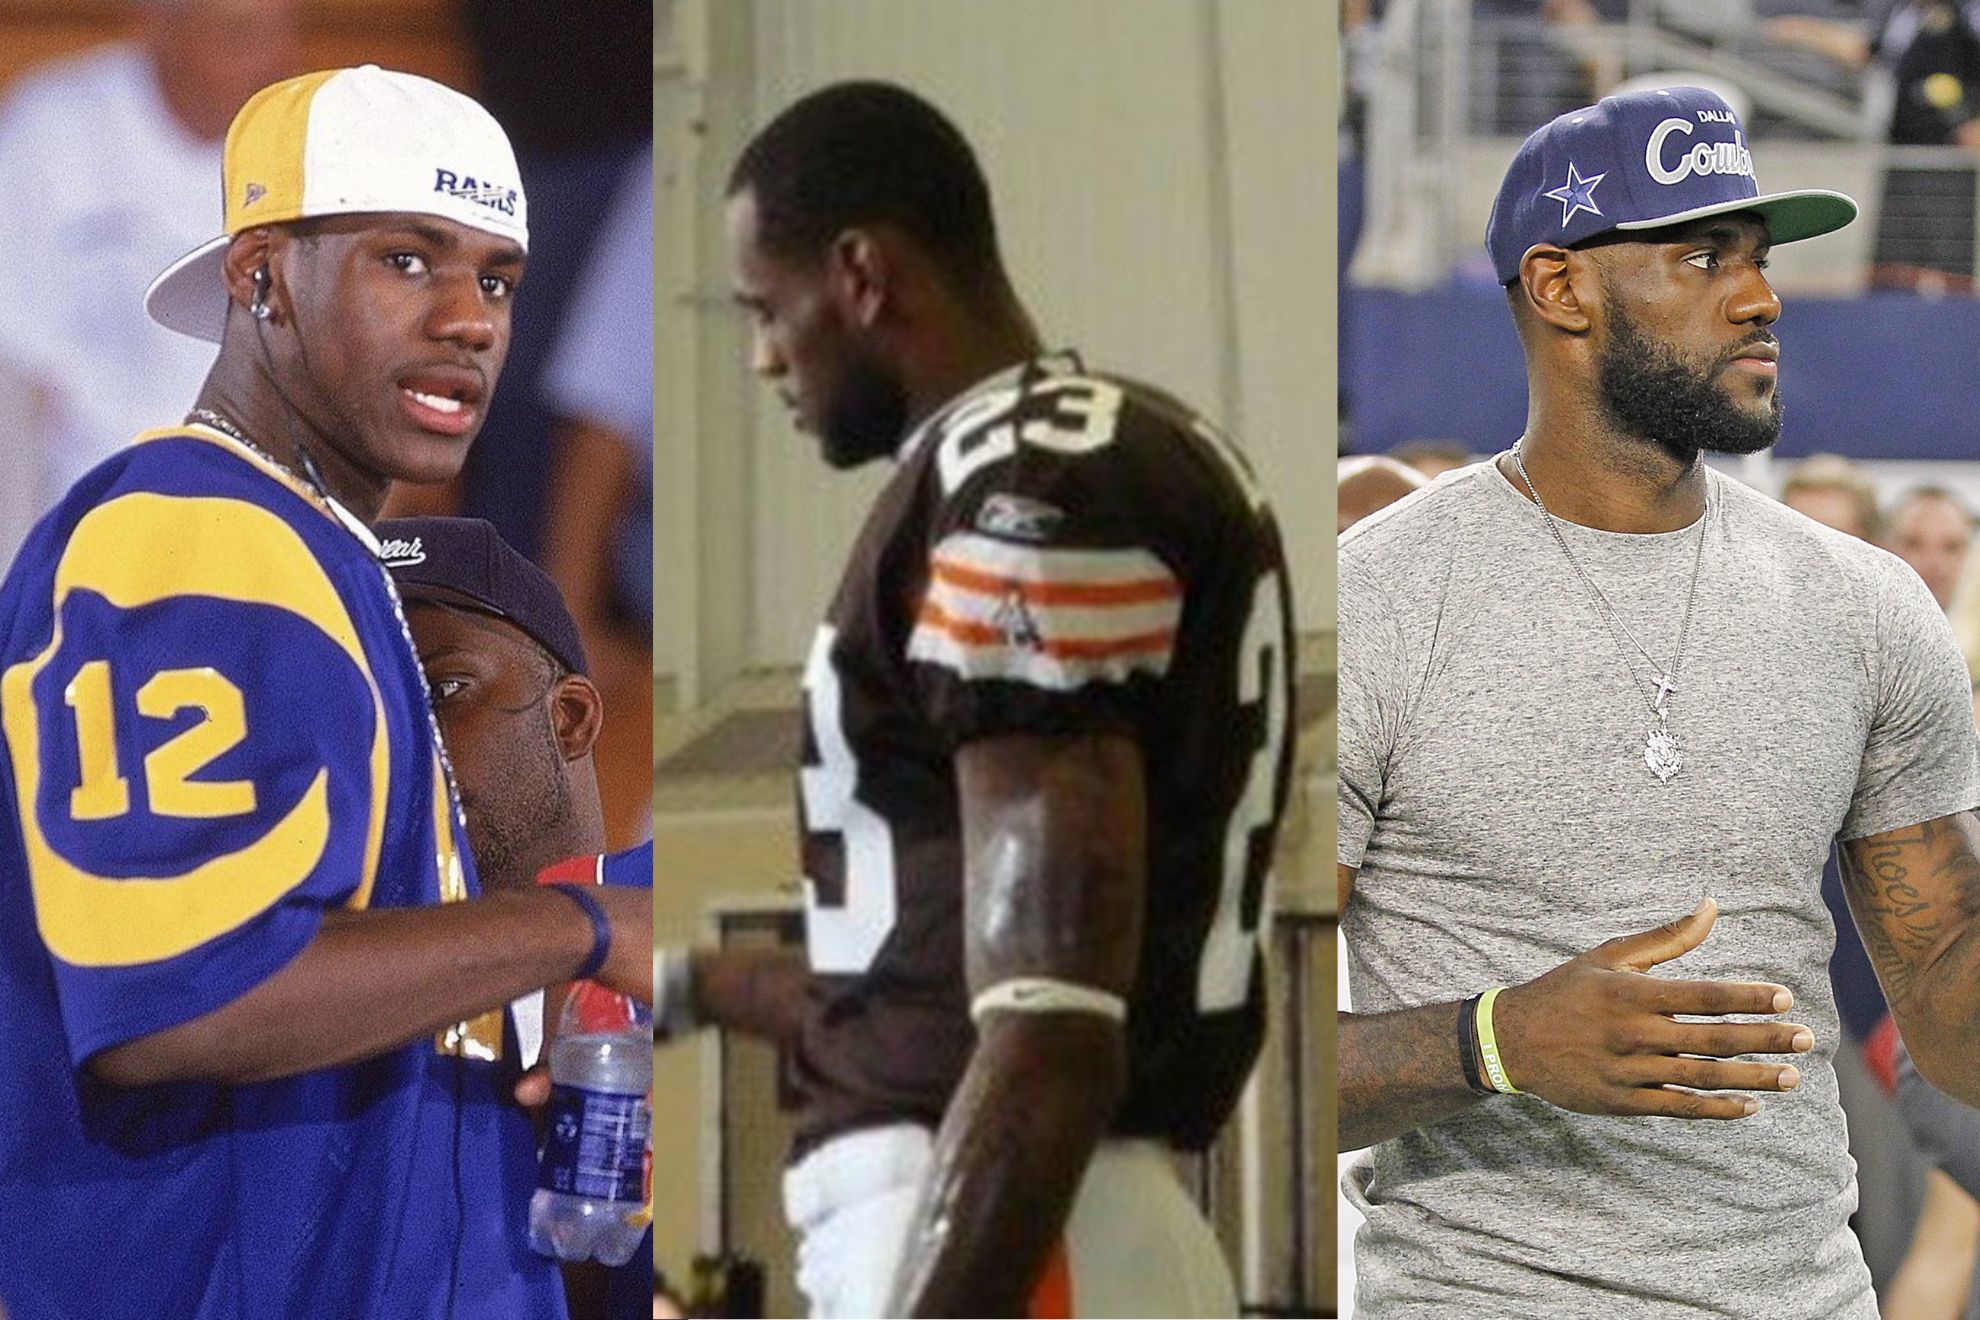 LeBron James throughout the years: with a Rams jersey, a Browns uniform, and a Dallas Cowboys hat at AT&T Stadium.